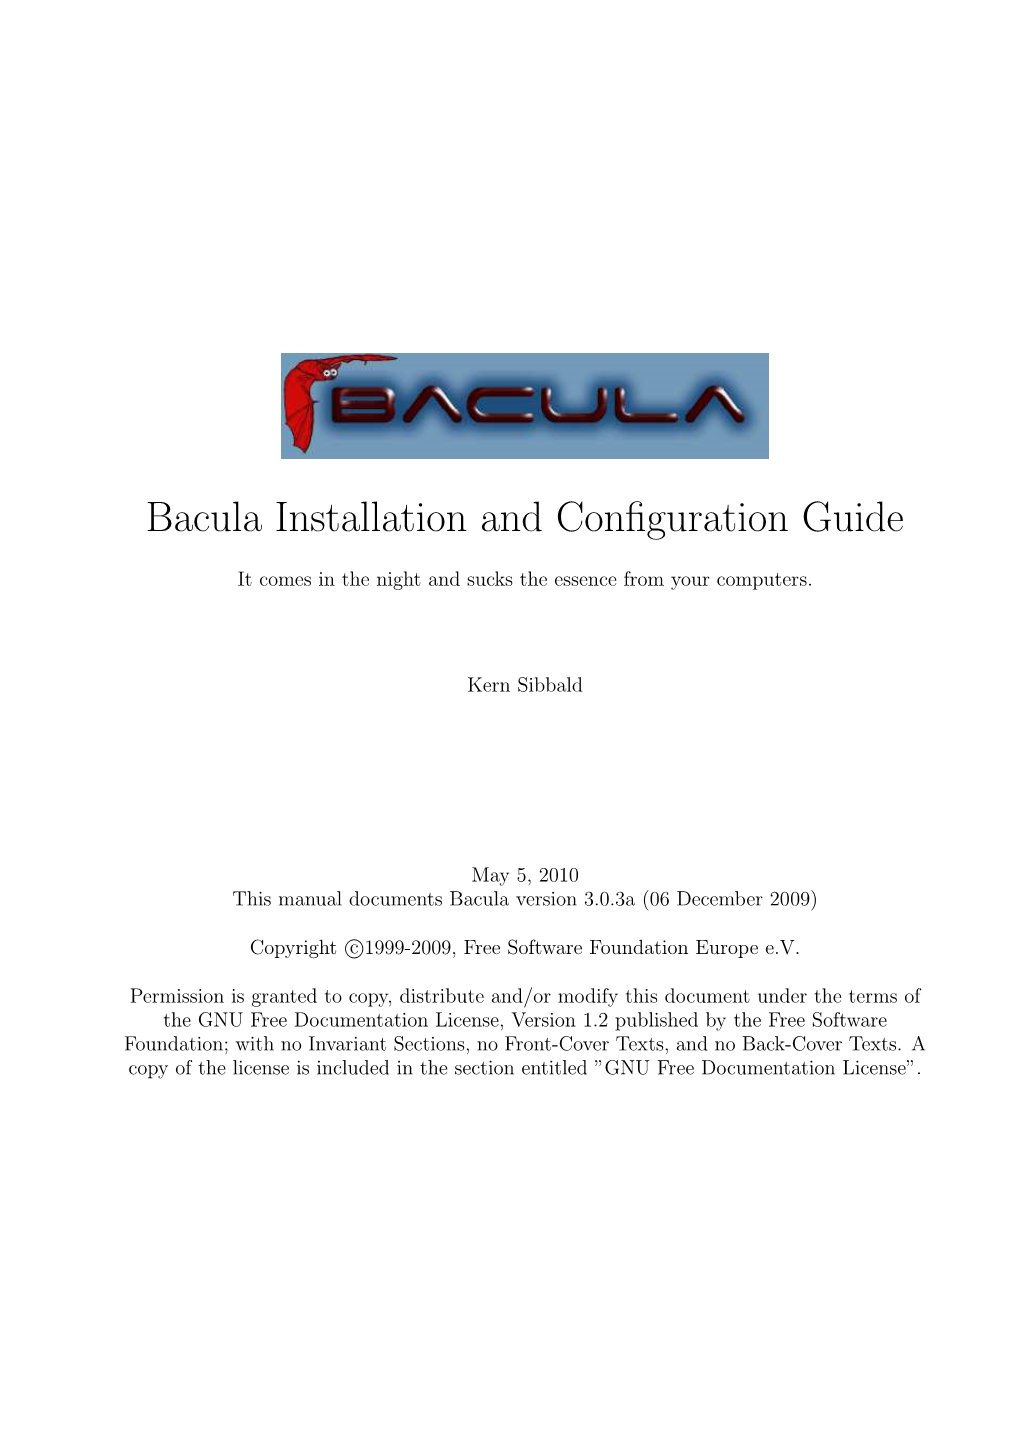 Bacula Installation and Configuration Guide